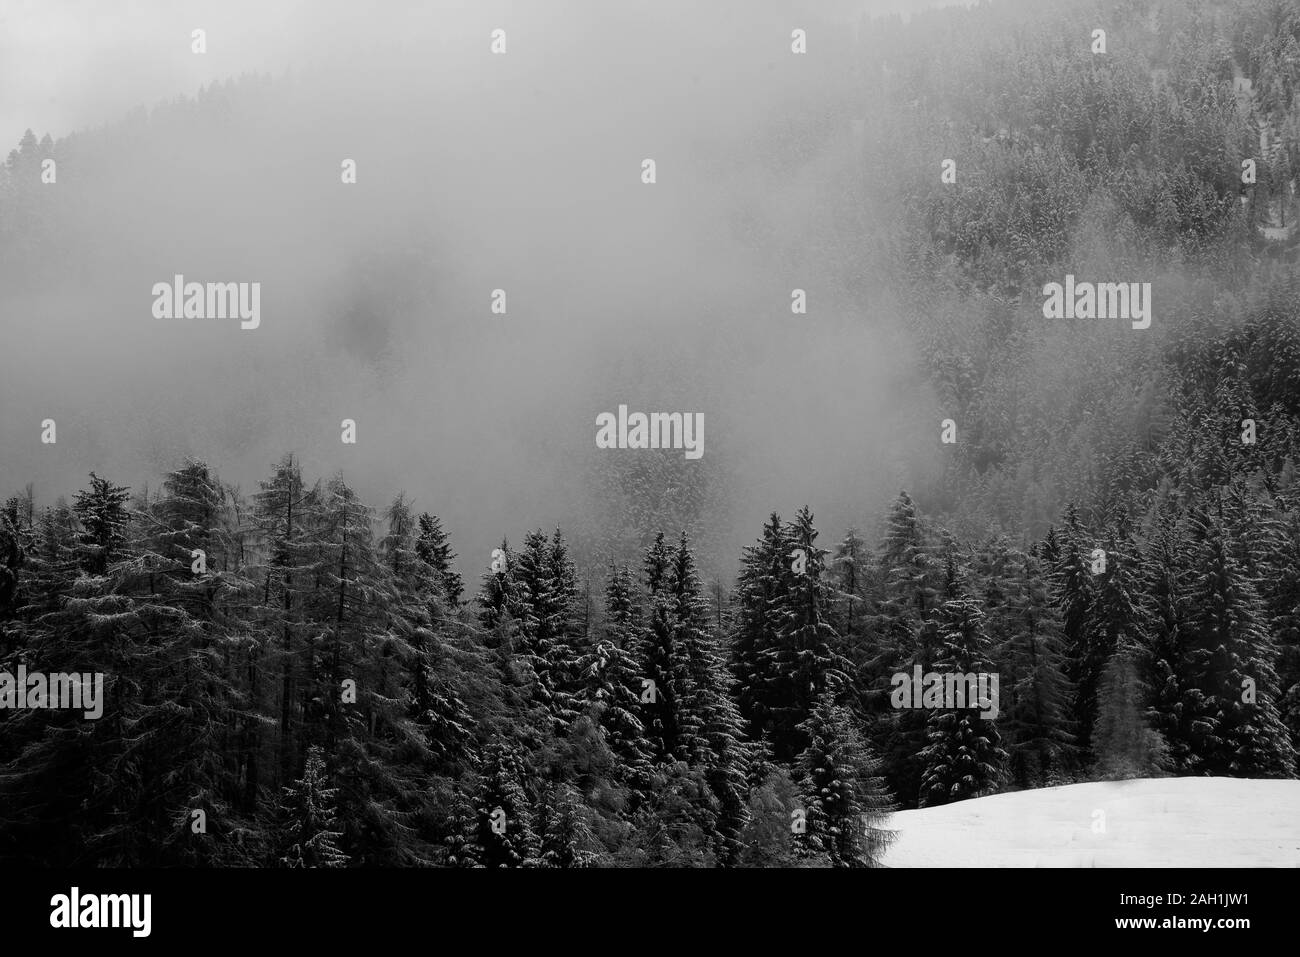 A snowy forest in the mountains with low clouds. Stock Photo